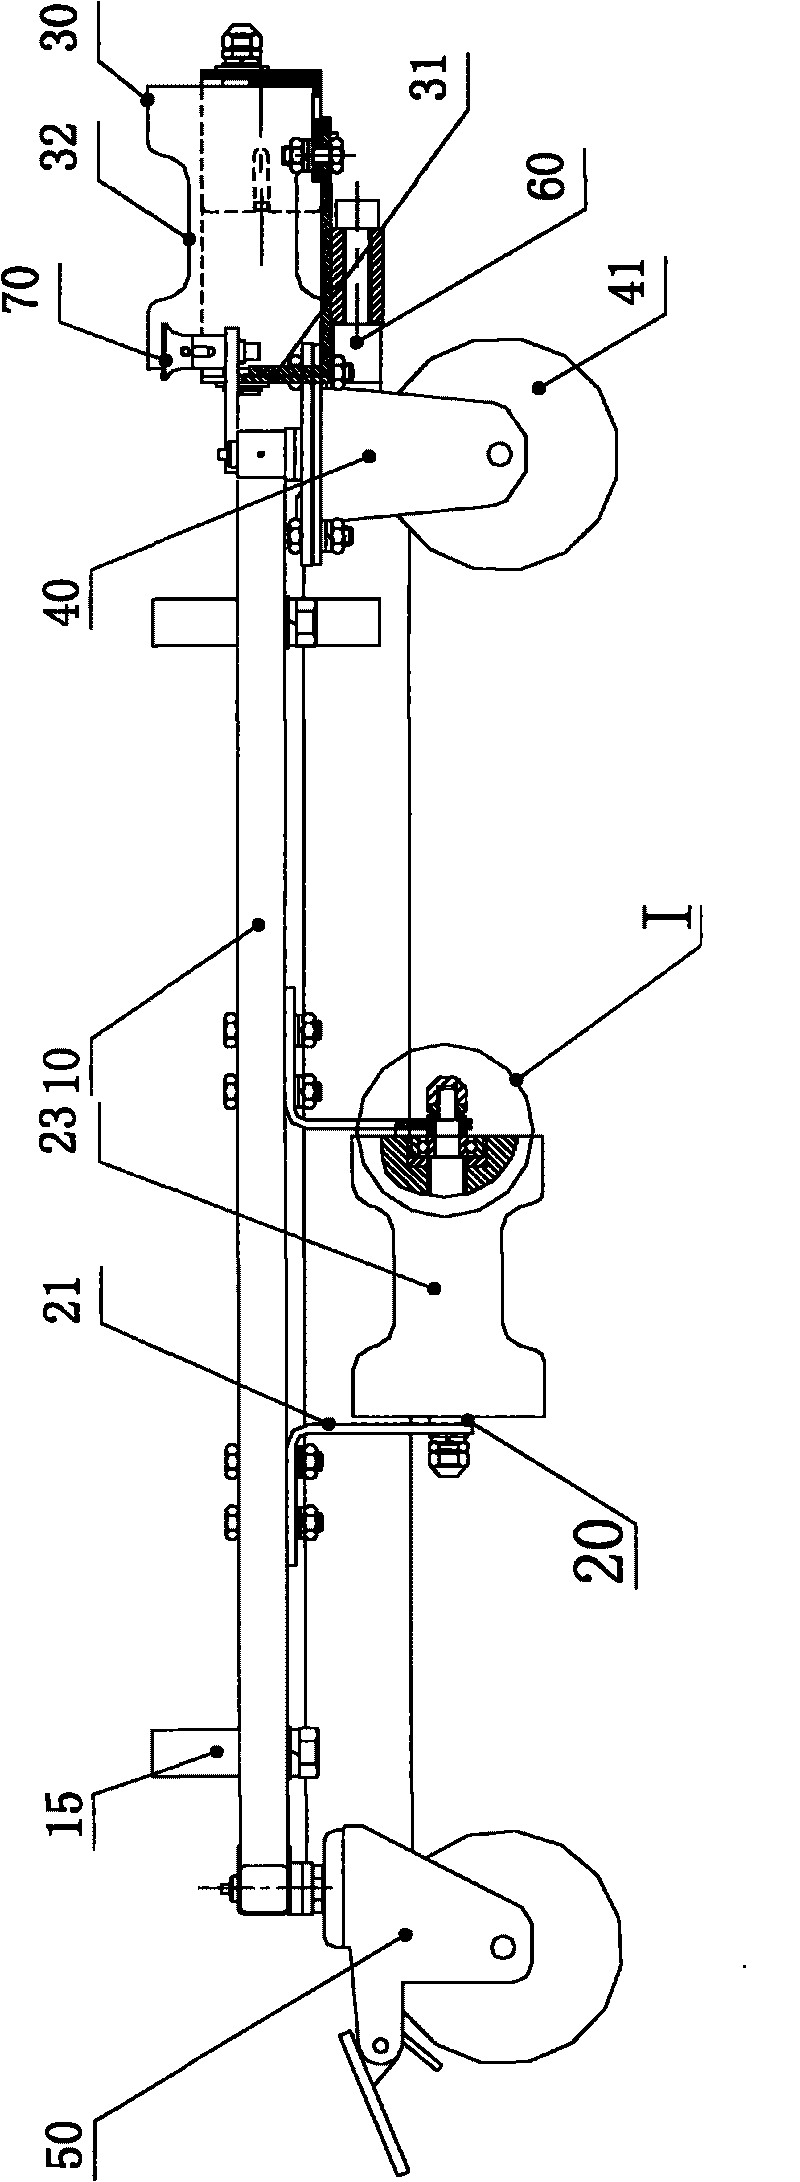 Double-rail travelling wheel carriage and railway lighting lamp